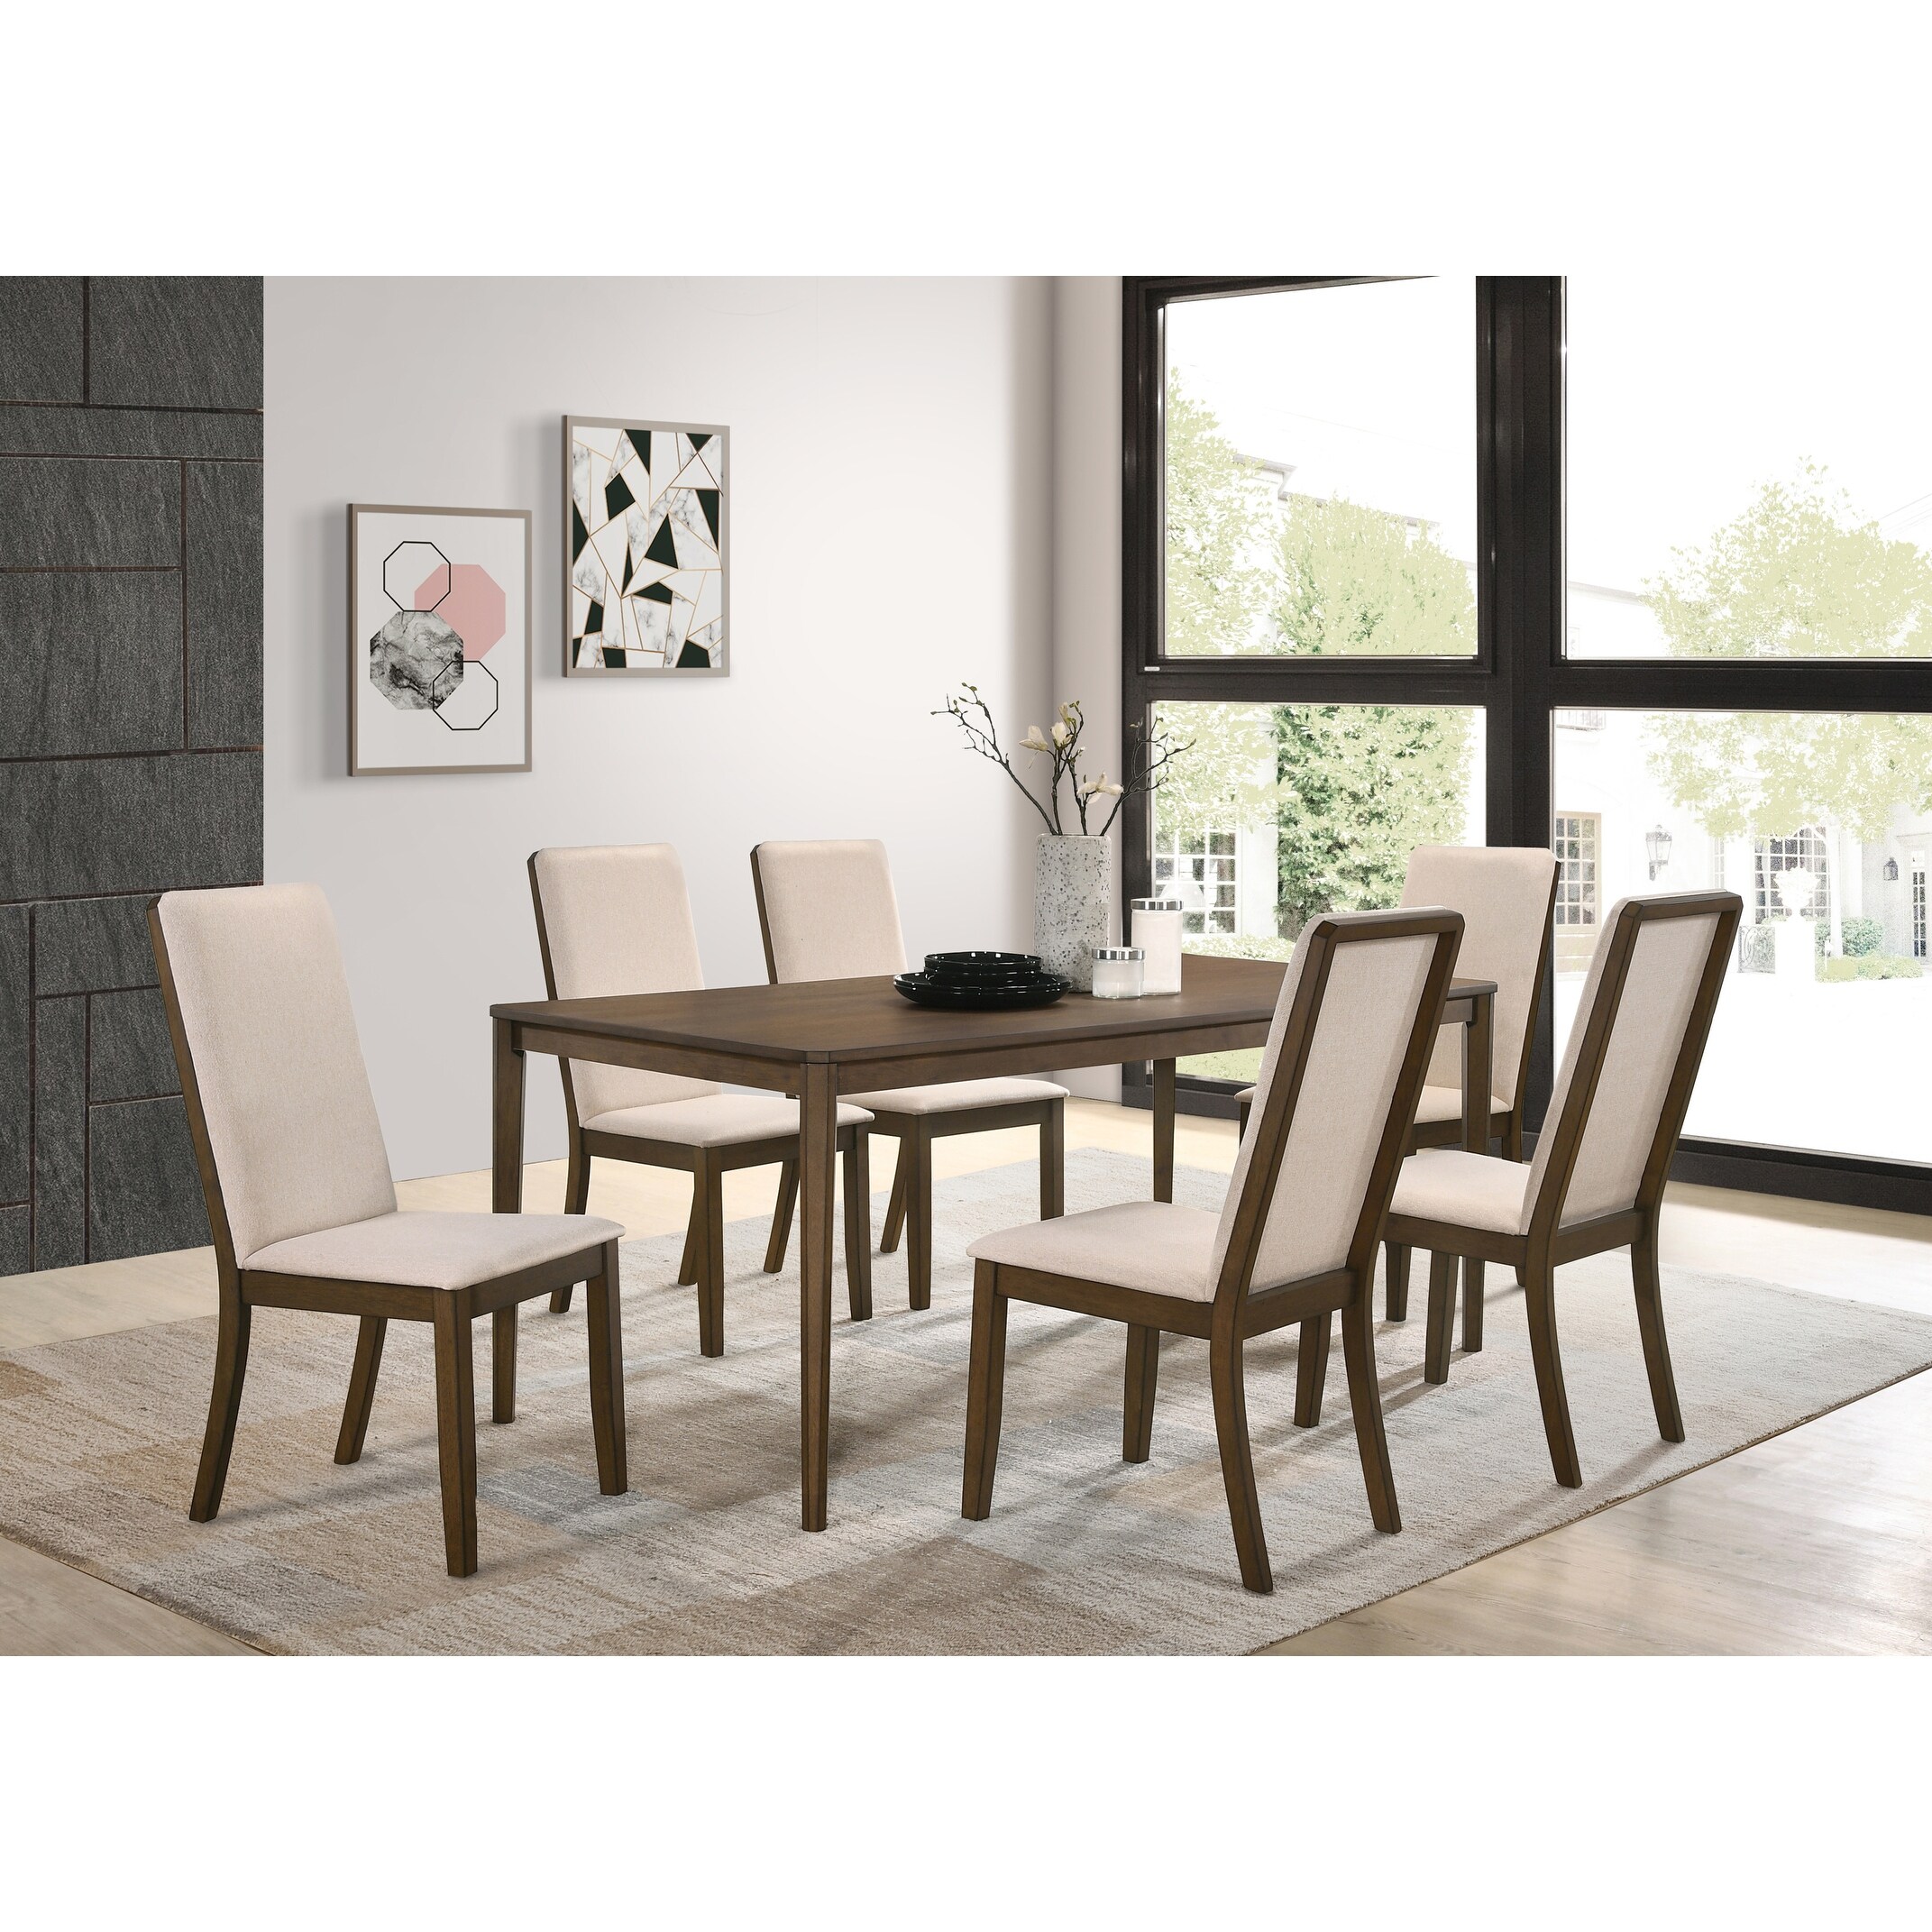 Breckenridge Latte and Medium Walnut Solid Back Dining Chairs (Set of 4)